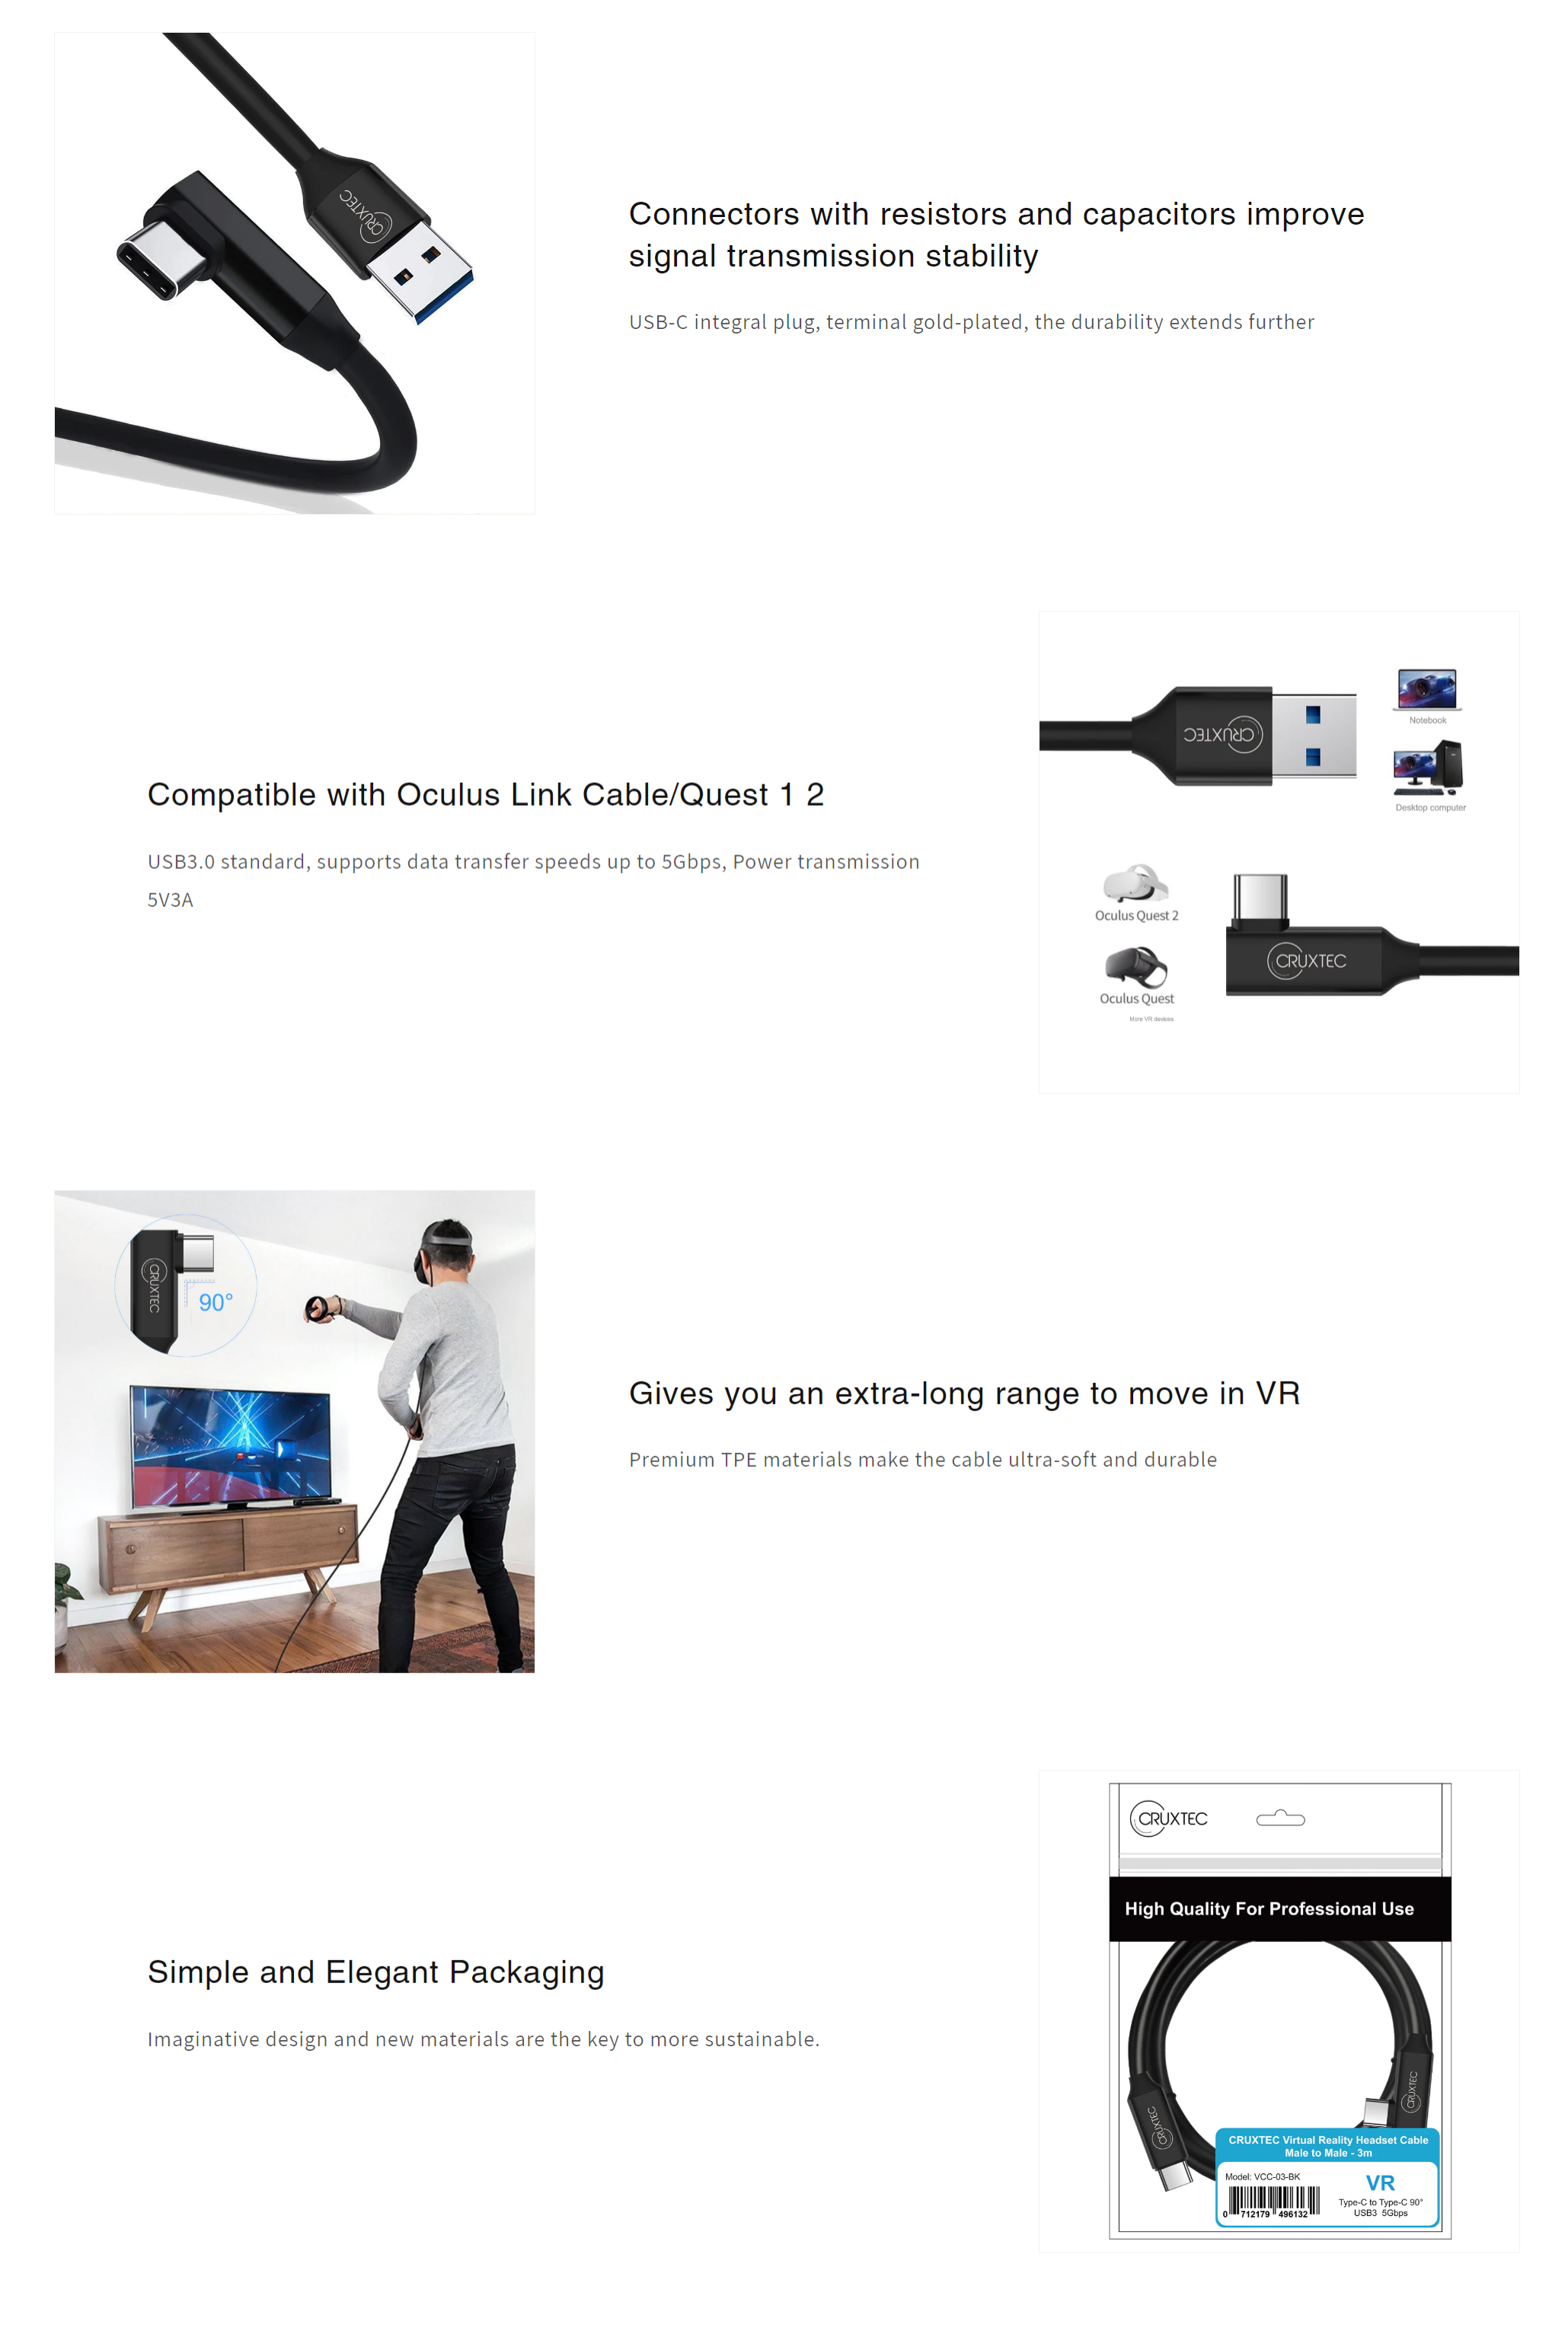 A large marketing image providing additional information about the product Cruxtec USB-A to USB-C 90 Degree Angle VR Cable - 3m - Additional alt info not provided